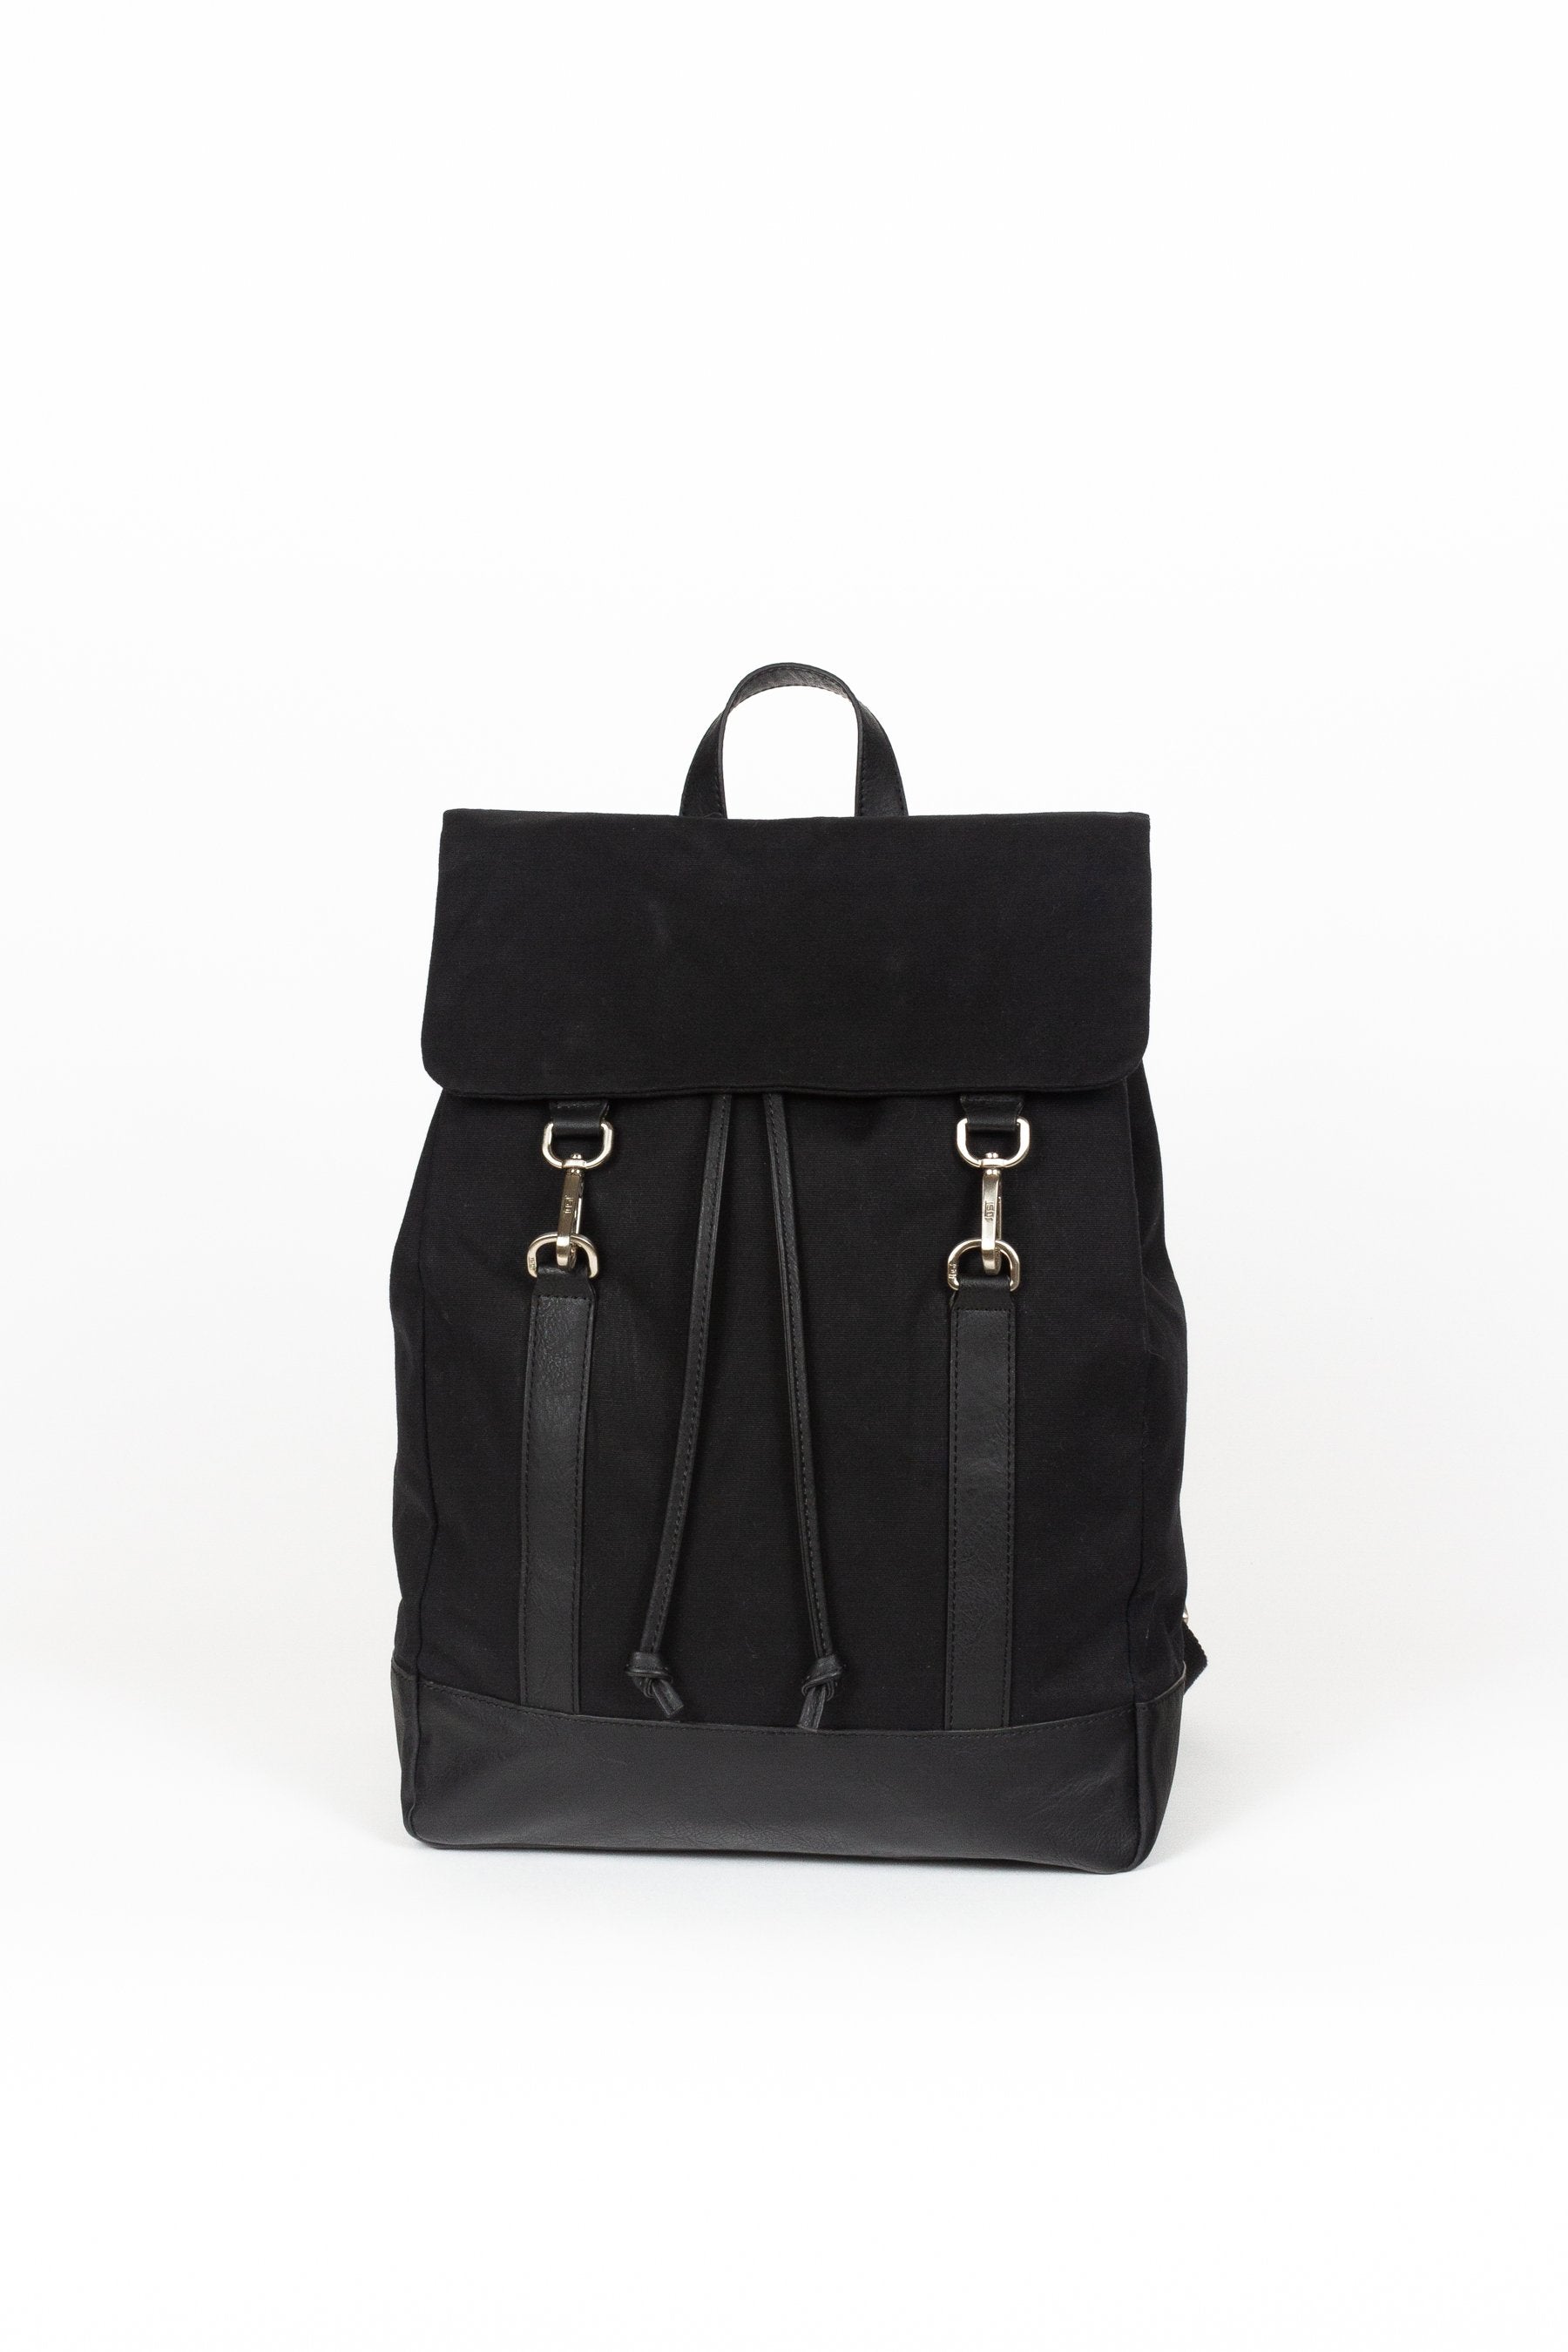 BEON.COM.AU Buy the Goteborg Drawstring Flip Top Backpack in Black by Jost Bags Jost at BEON.COM.AU